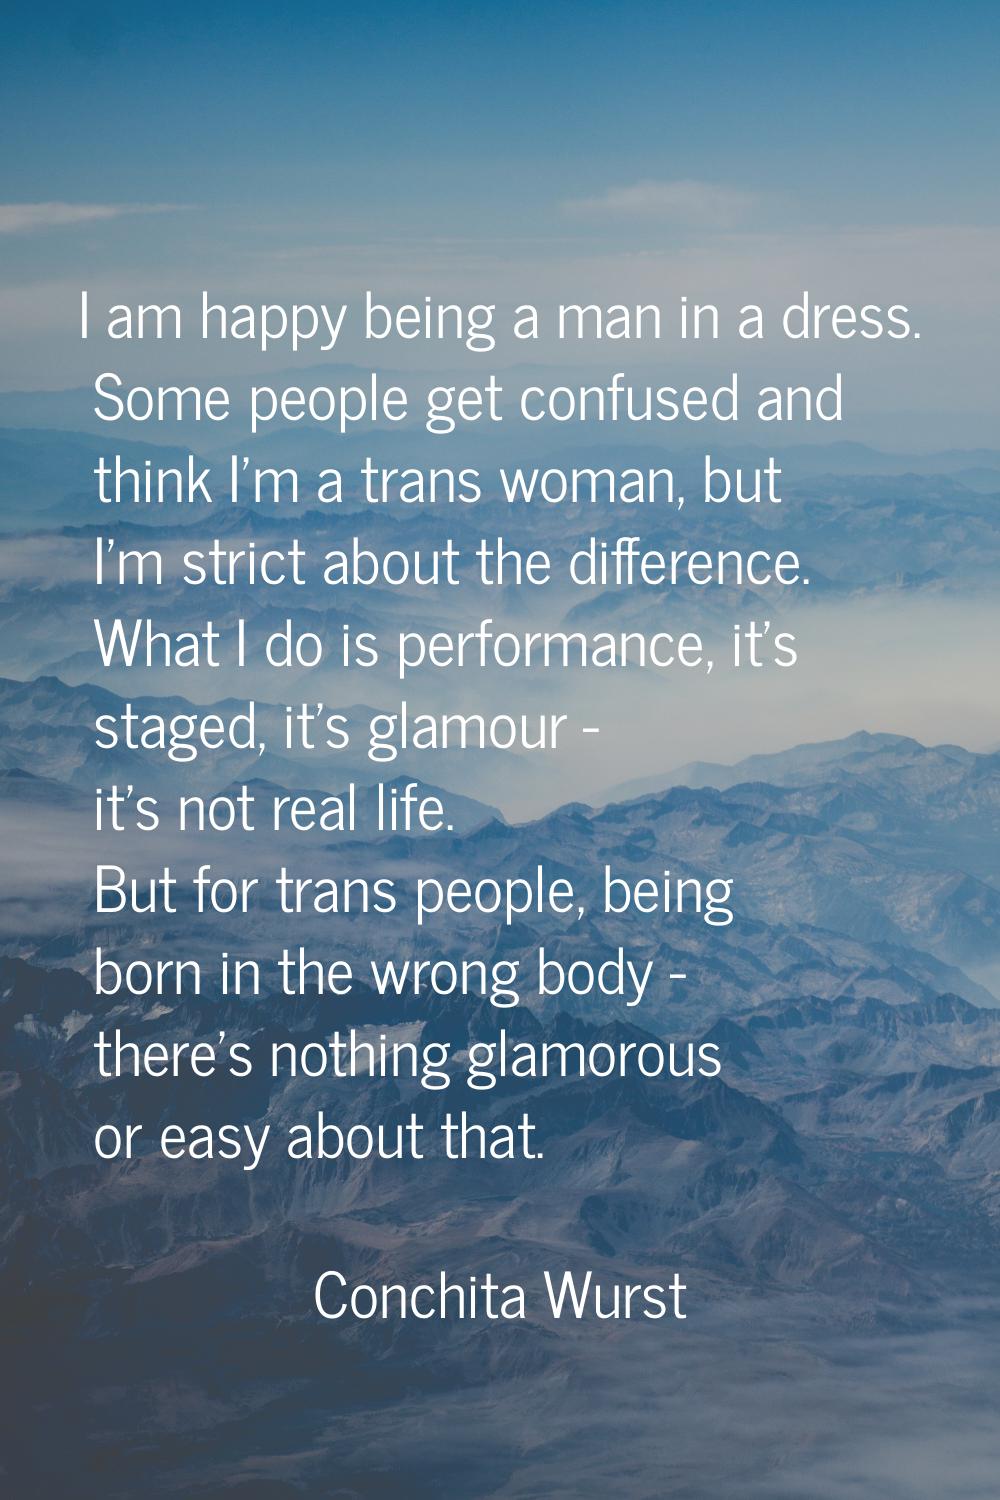 I am happy being a man in a dress. Some people get confused and think I'm a trans woman, but I'm st